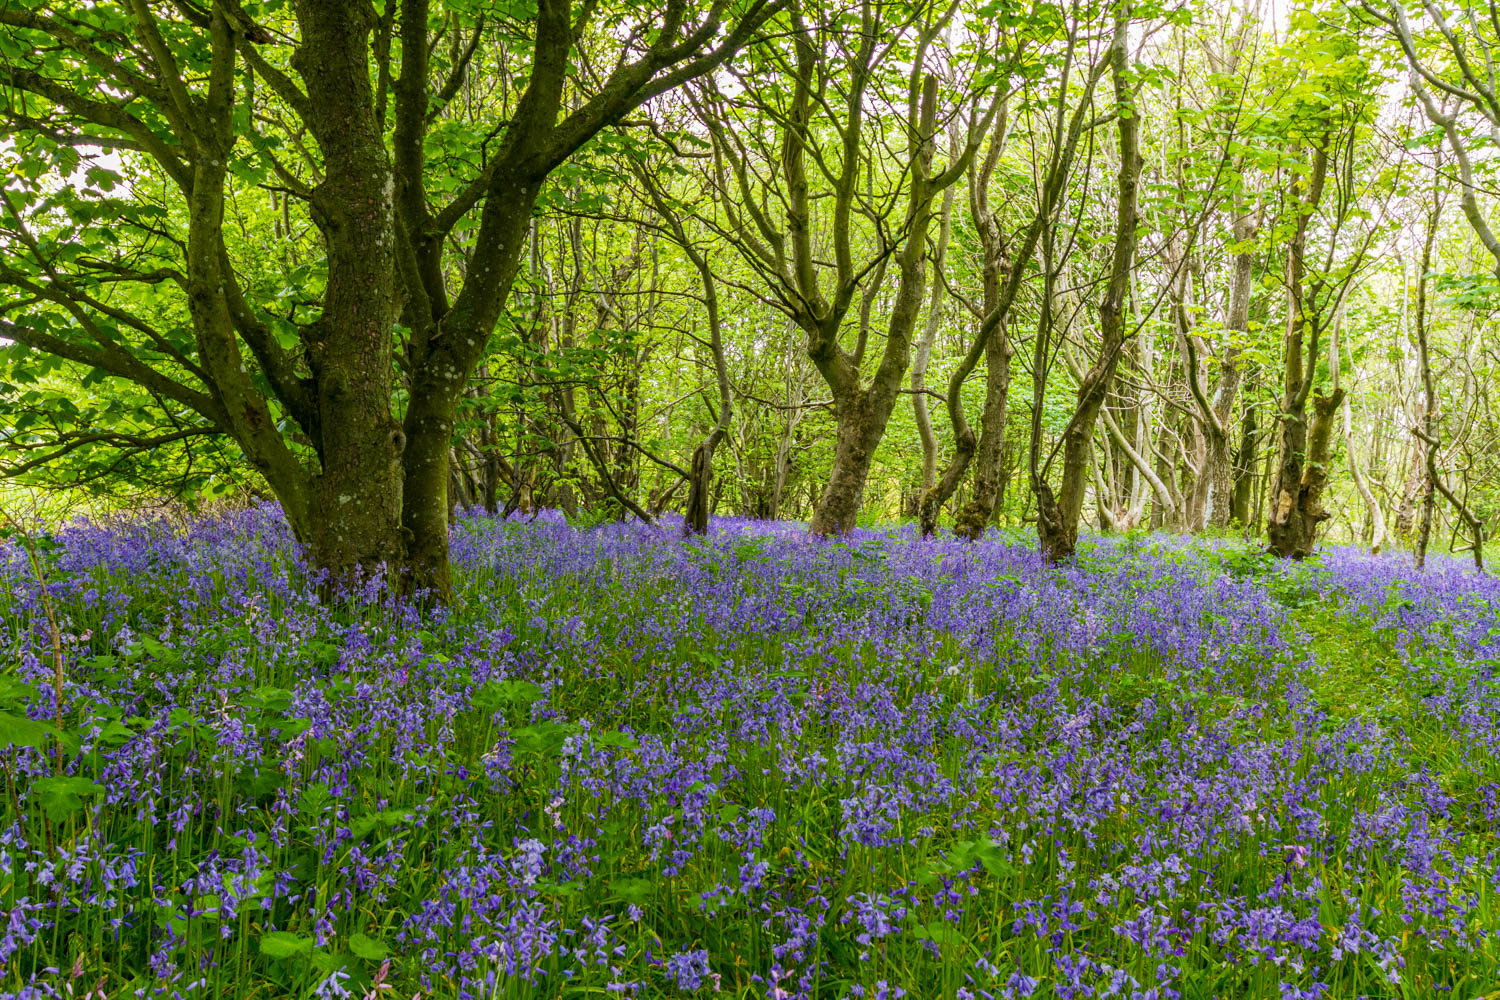 Through the bluebell wood